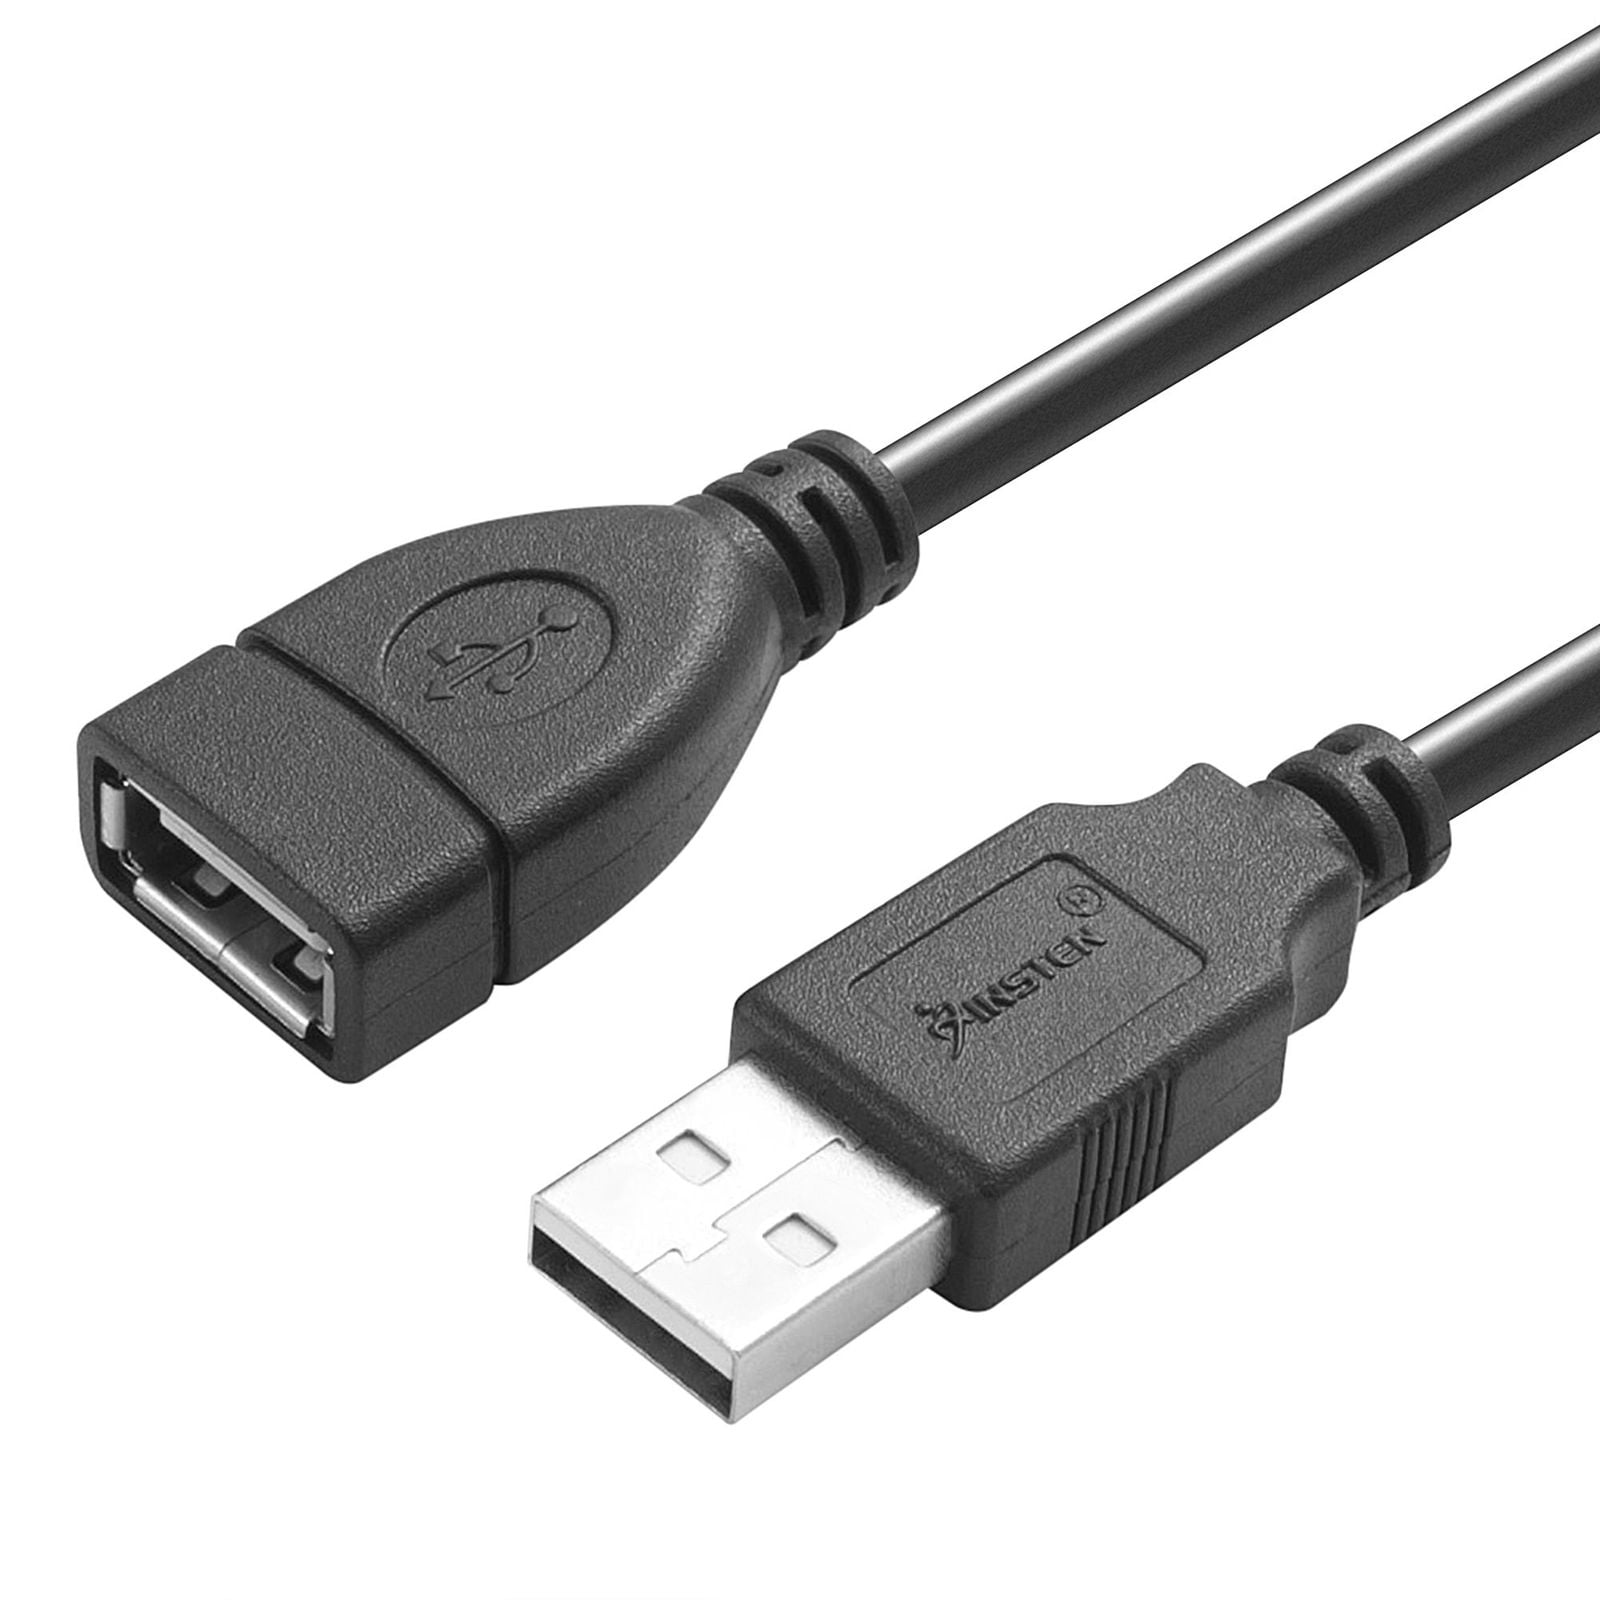 USB 3.0 A-A Cable Type A Male-Male Cable Cord for Data Transfer HardDrive 2pkg 